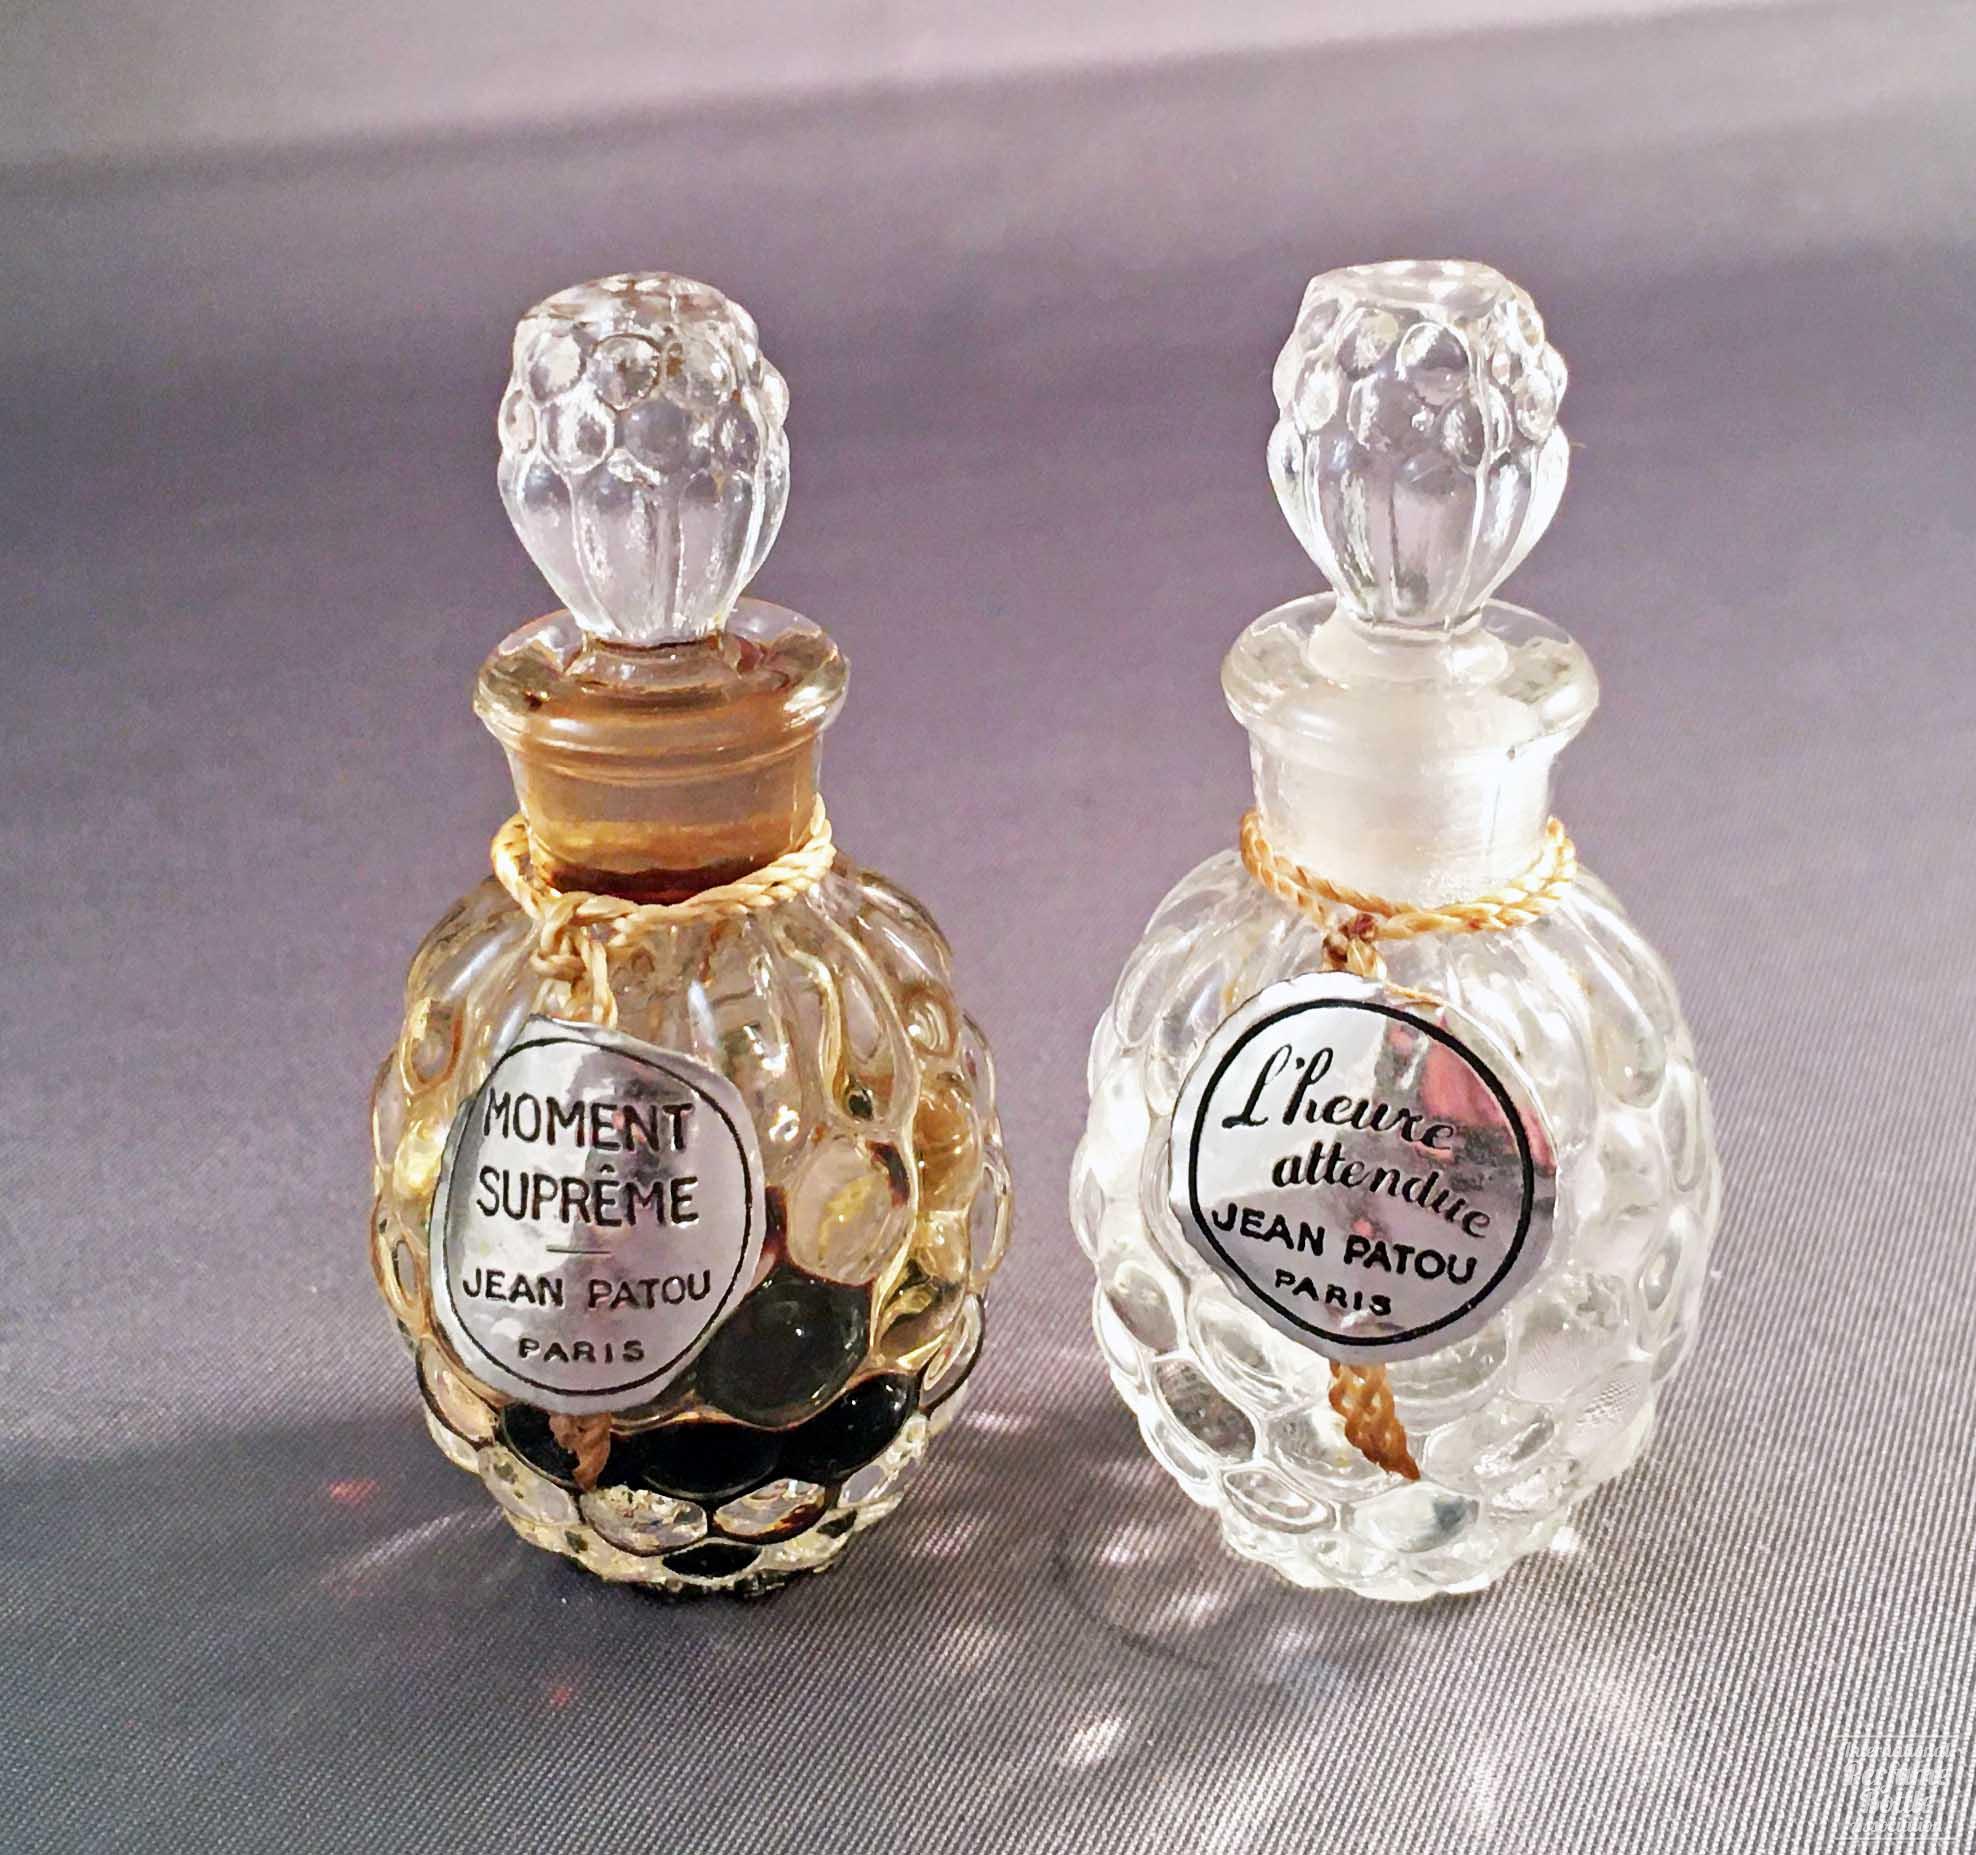 "Moment Suprême" and "L'Heure Attendue" Minis by Jean Patou